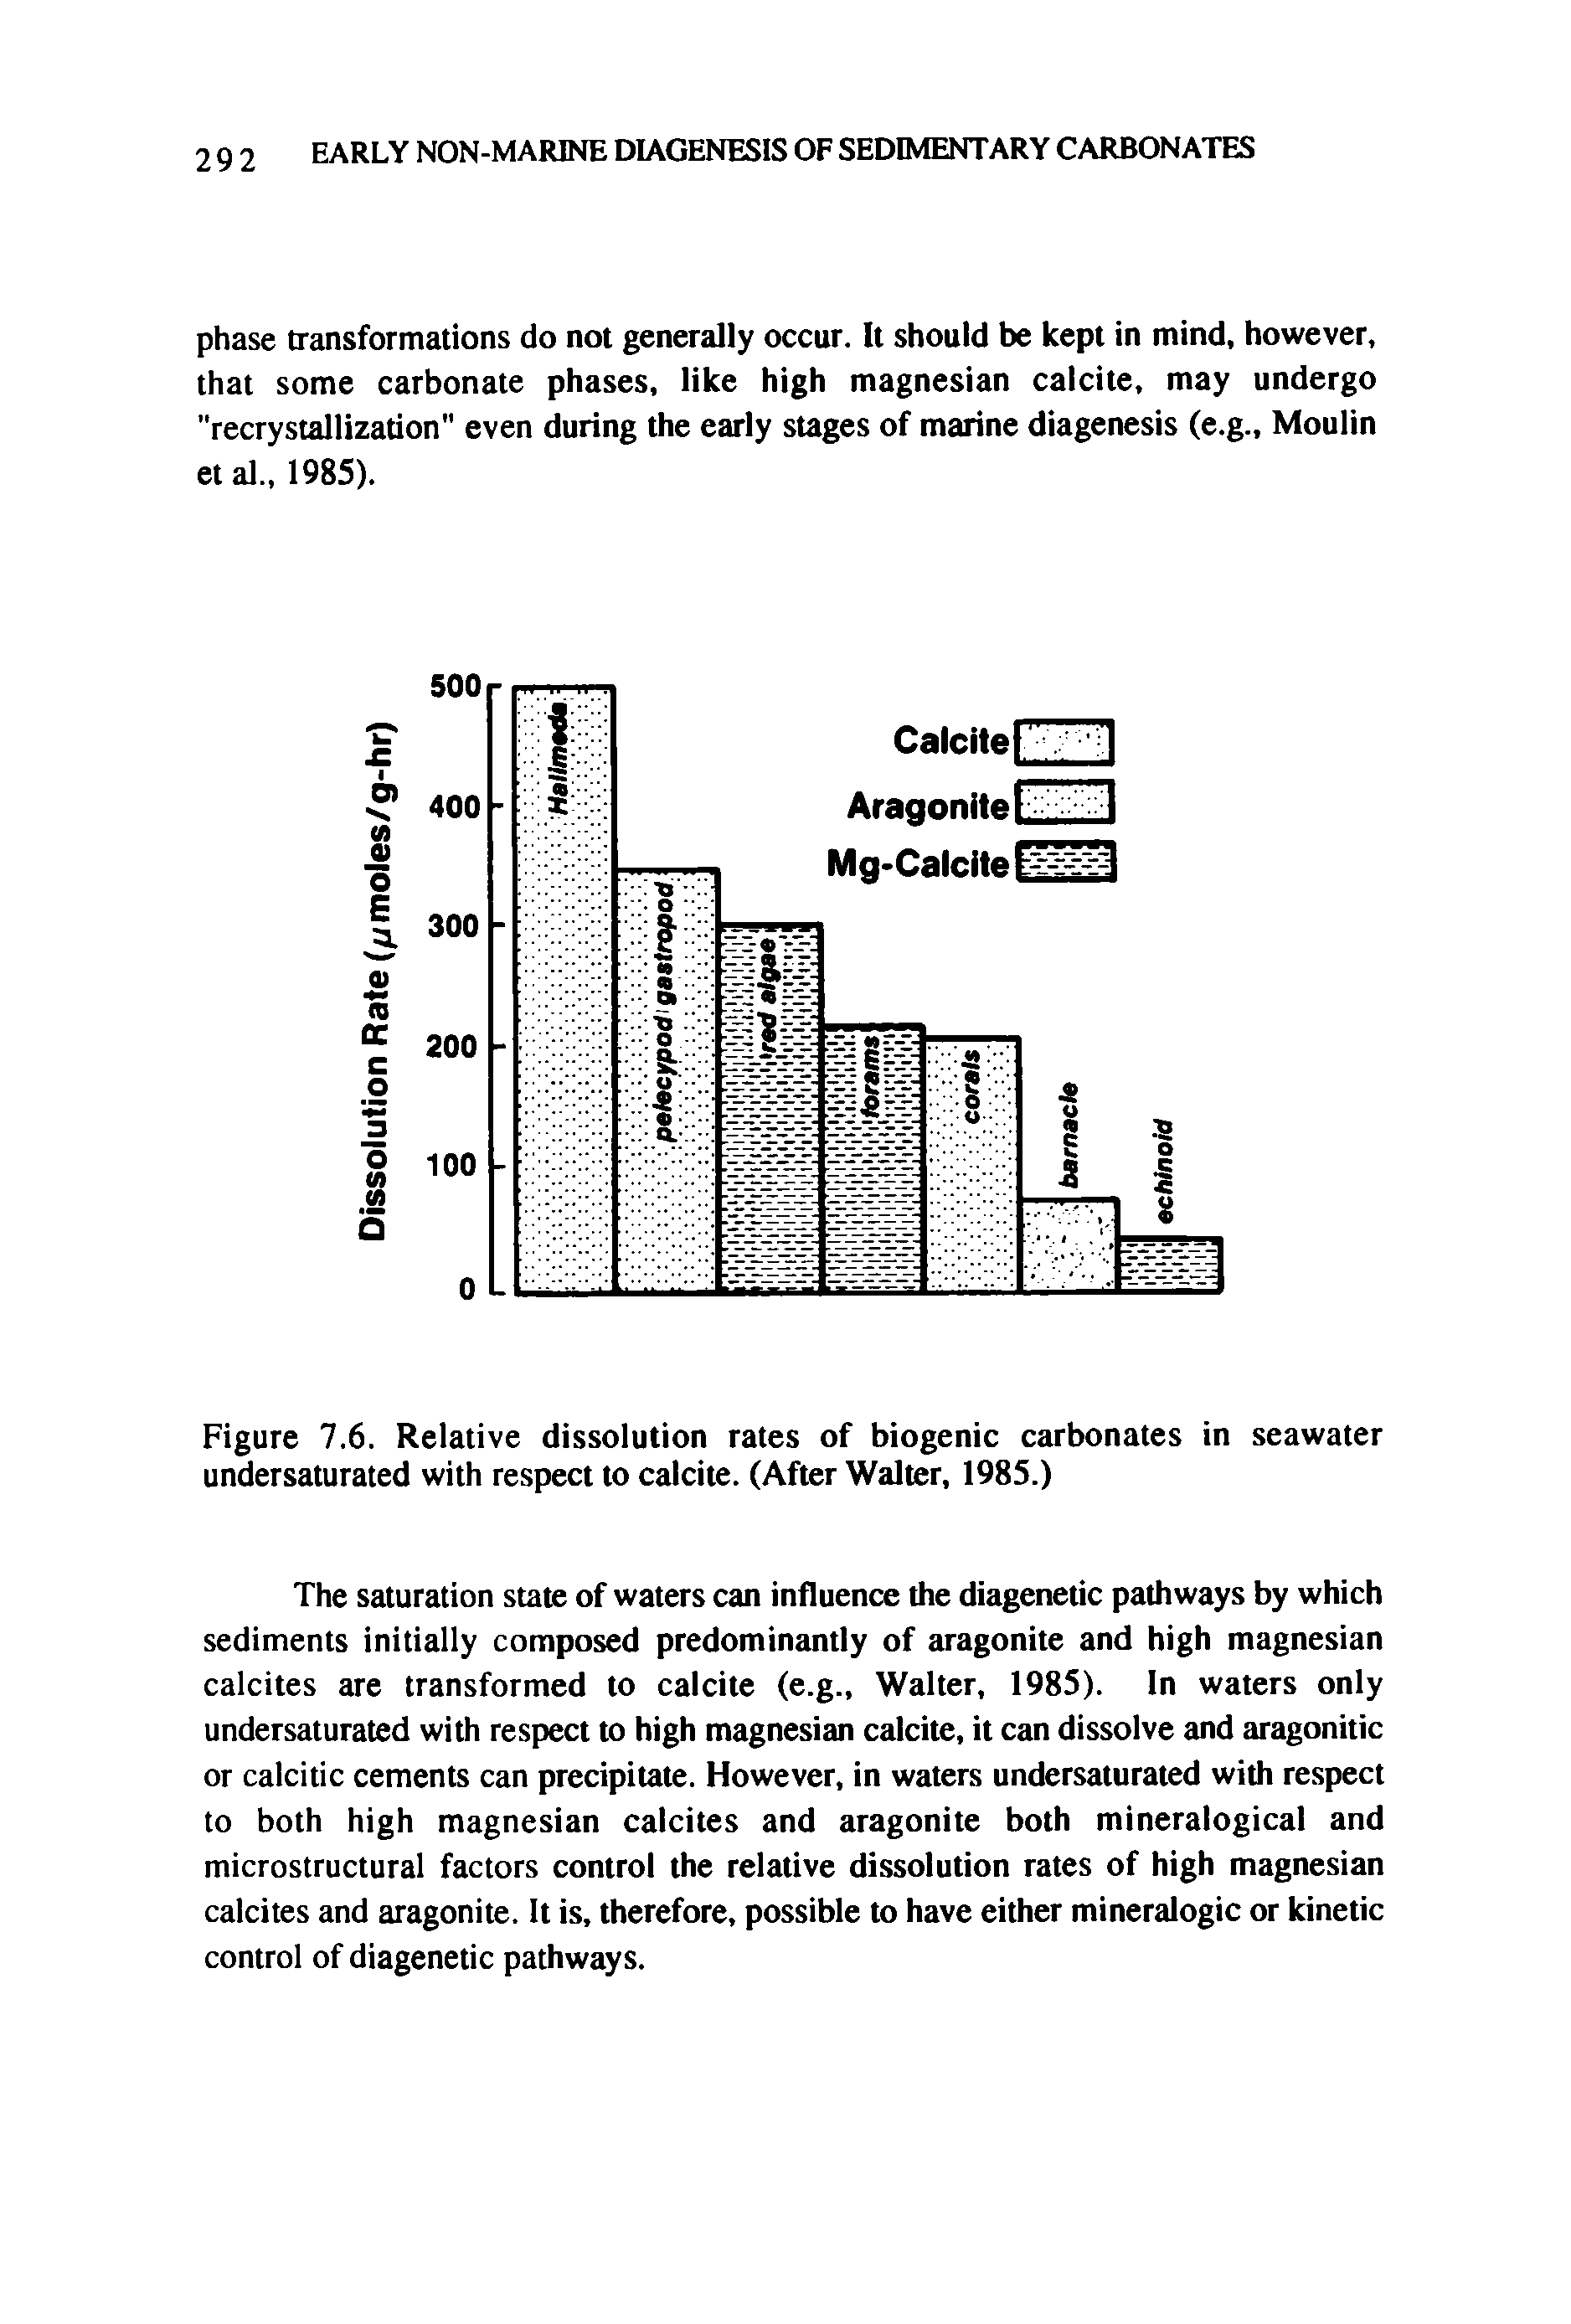 Figure 7.6. Relative dissolution rates of biogenic carbonates in seawater undersaturated with respect to calcite. (After Walter, 1985.)...